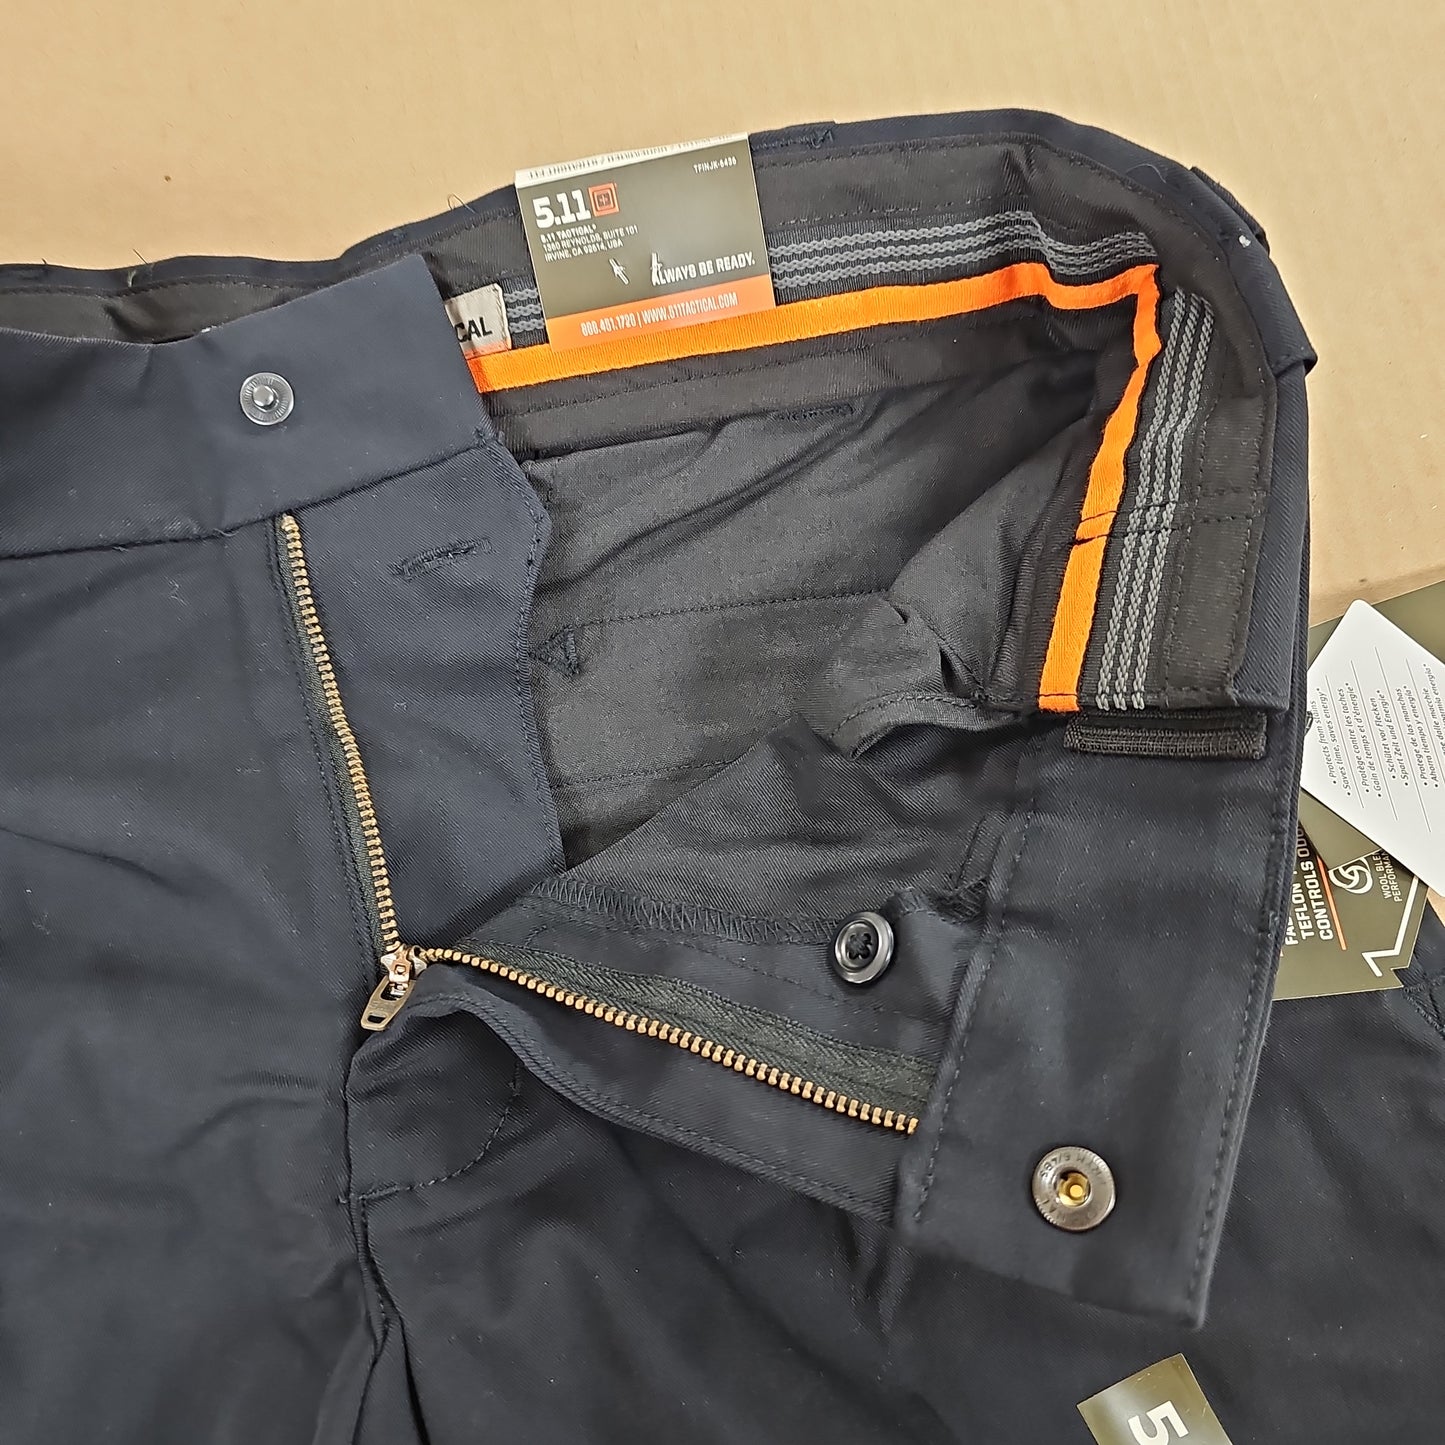 5.11 Tactical Pant: Twill, FT PW, CL-A Mid. Navy, 30 74492-750-30